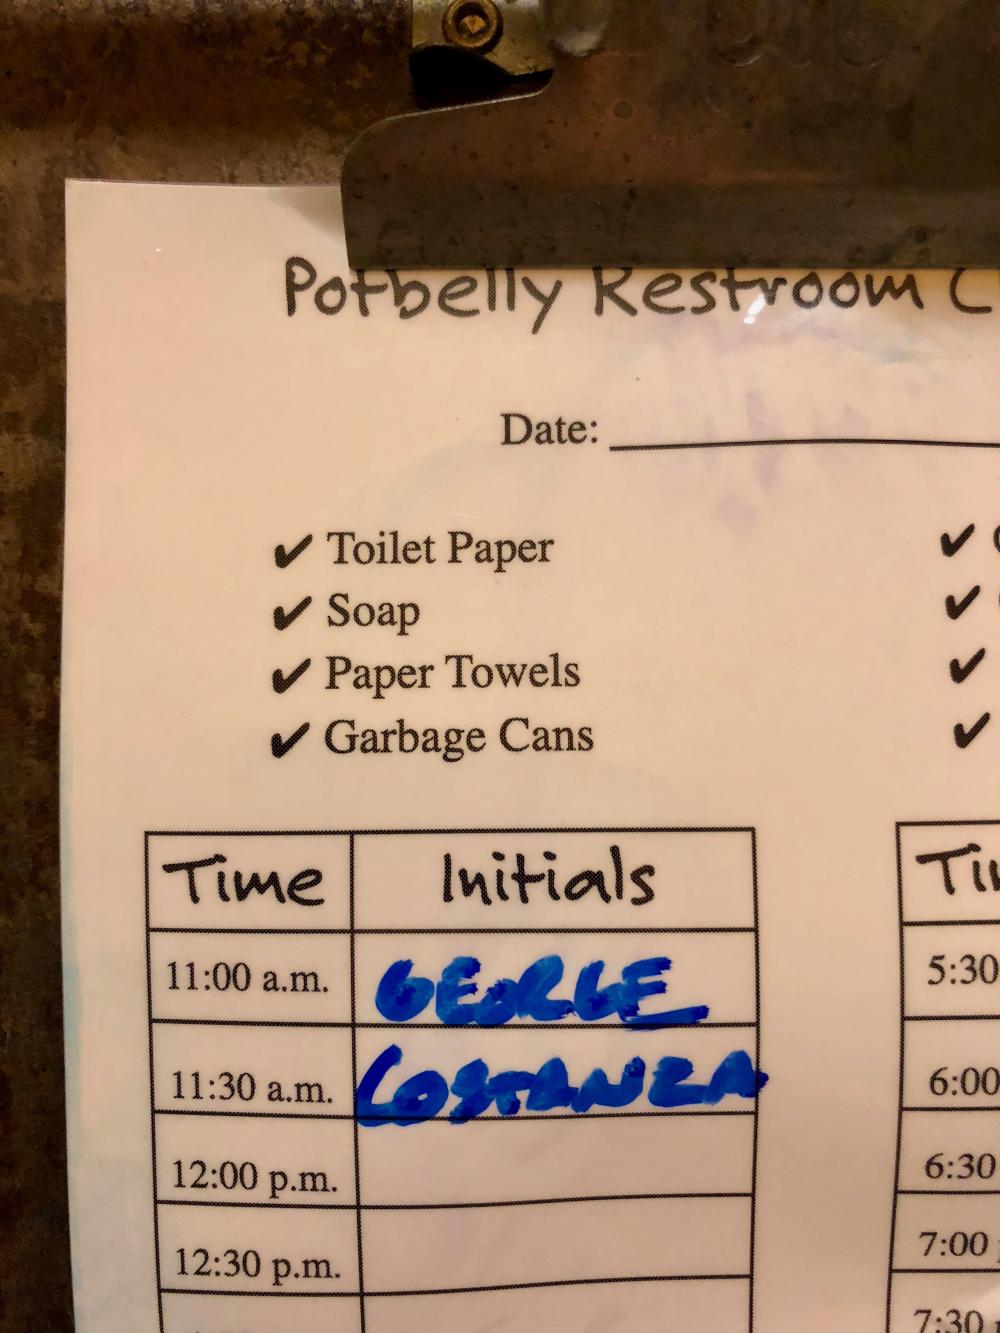 George Costanza cleaned the Potbelly Restroom